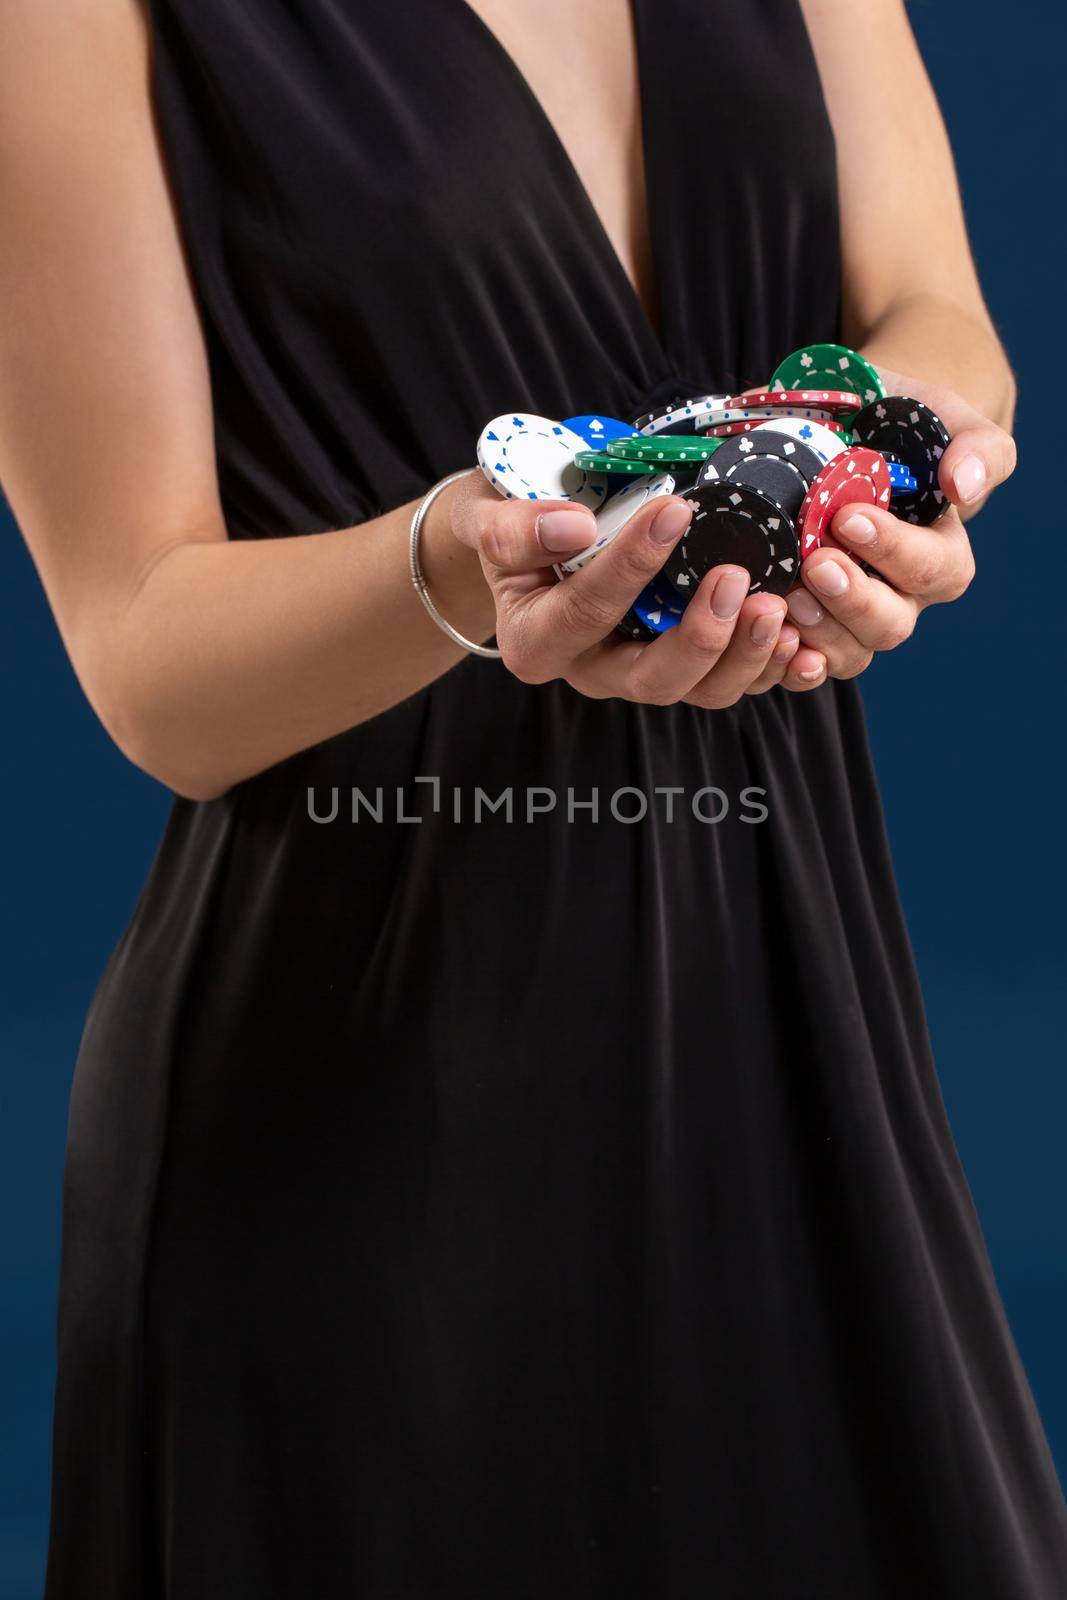 Elegant female casino player holding a handful of chips on dark blue background, hands close up. A woman in a black dress with poker chips in her hands